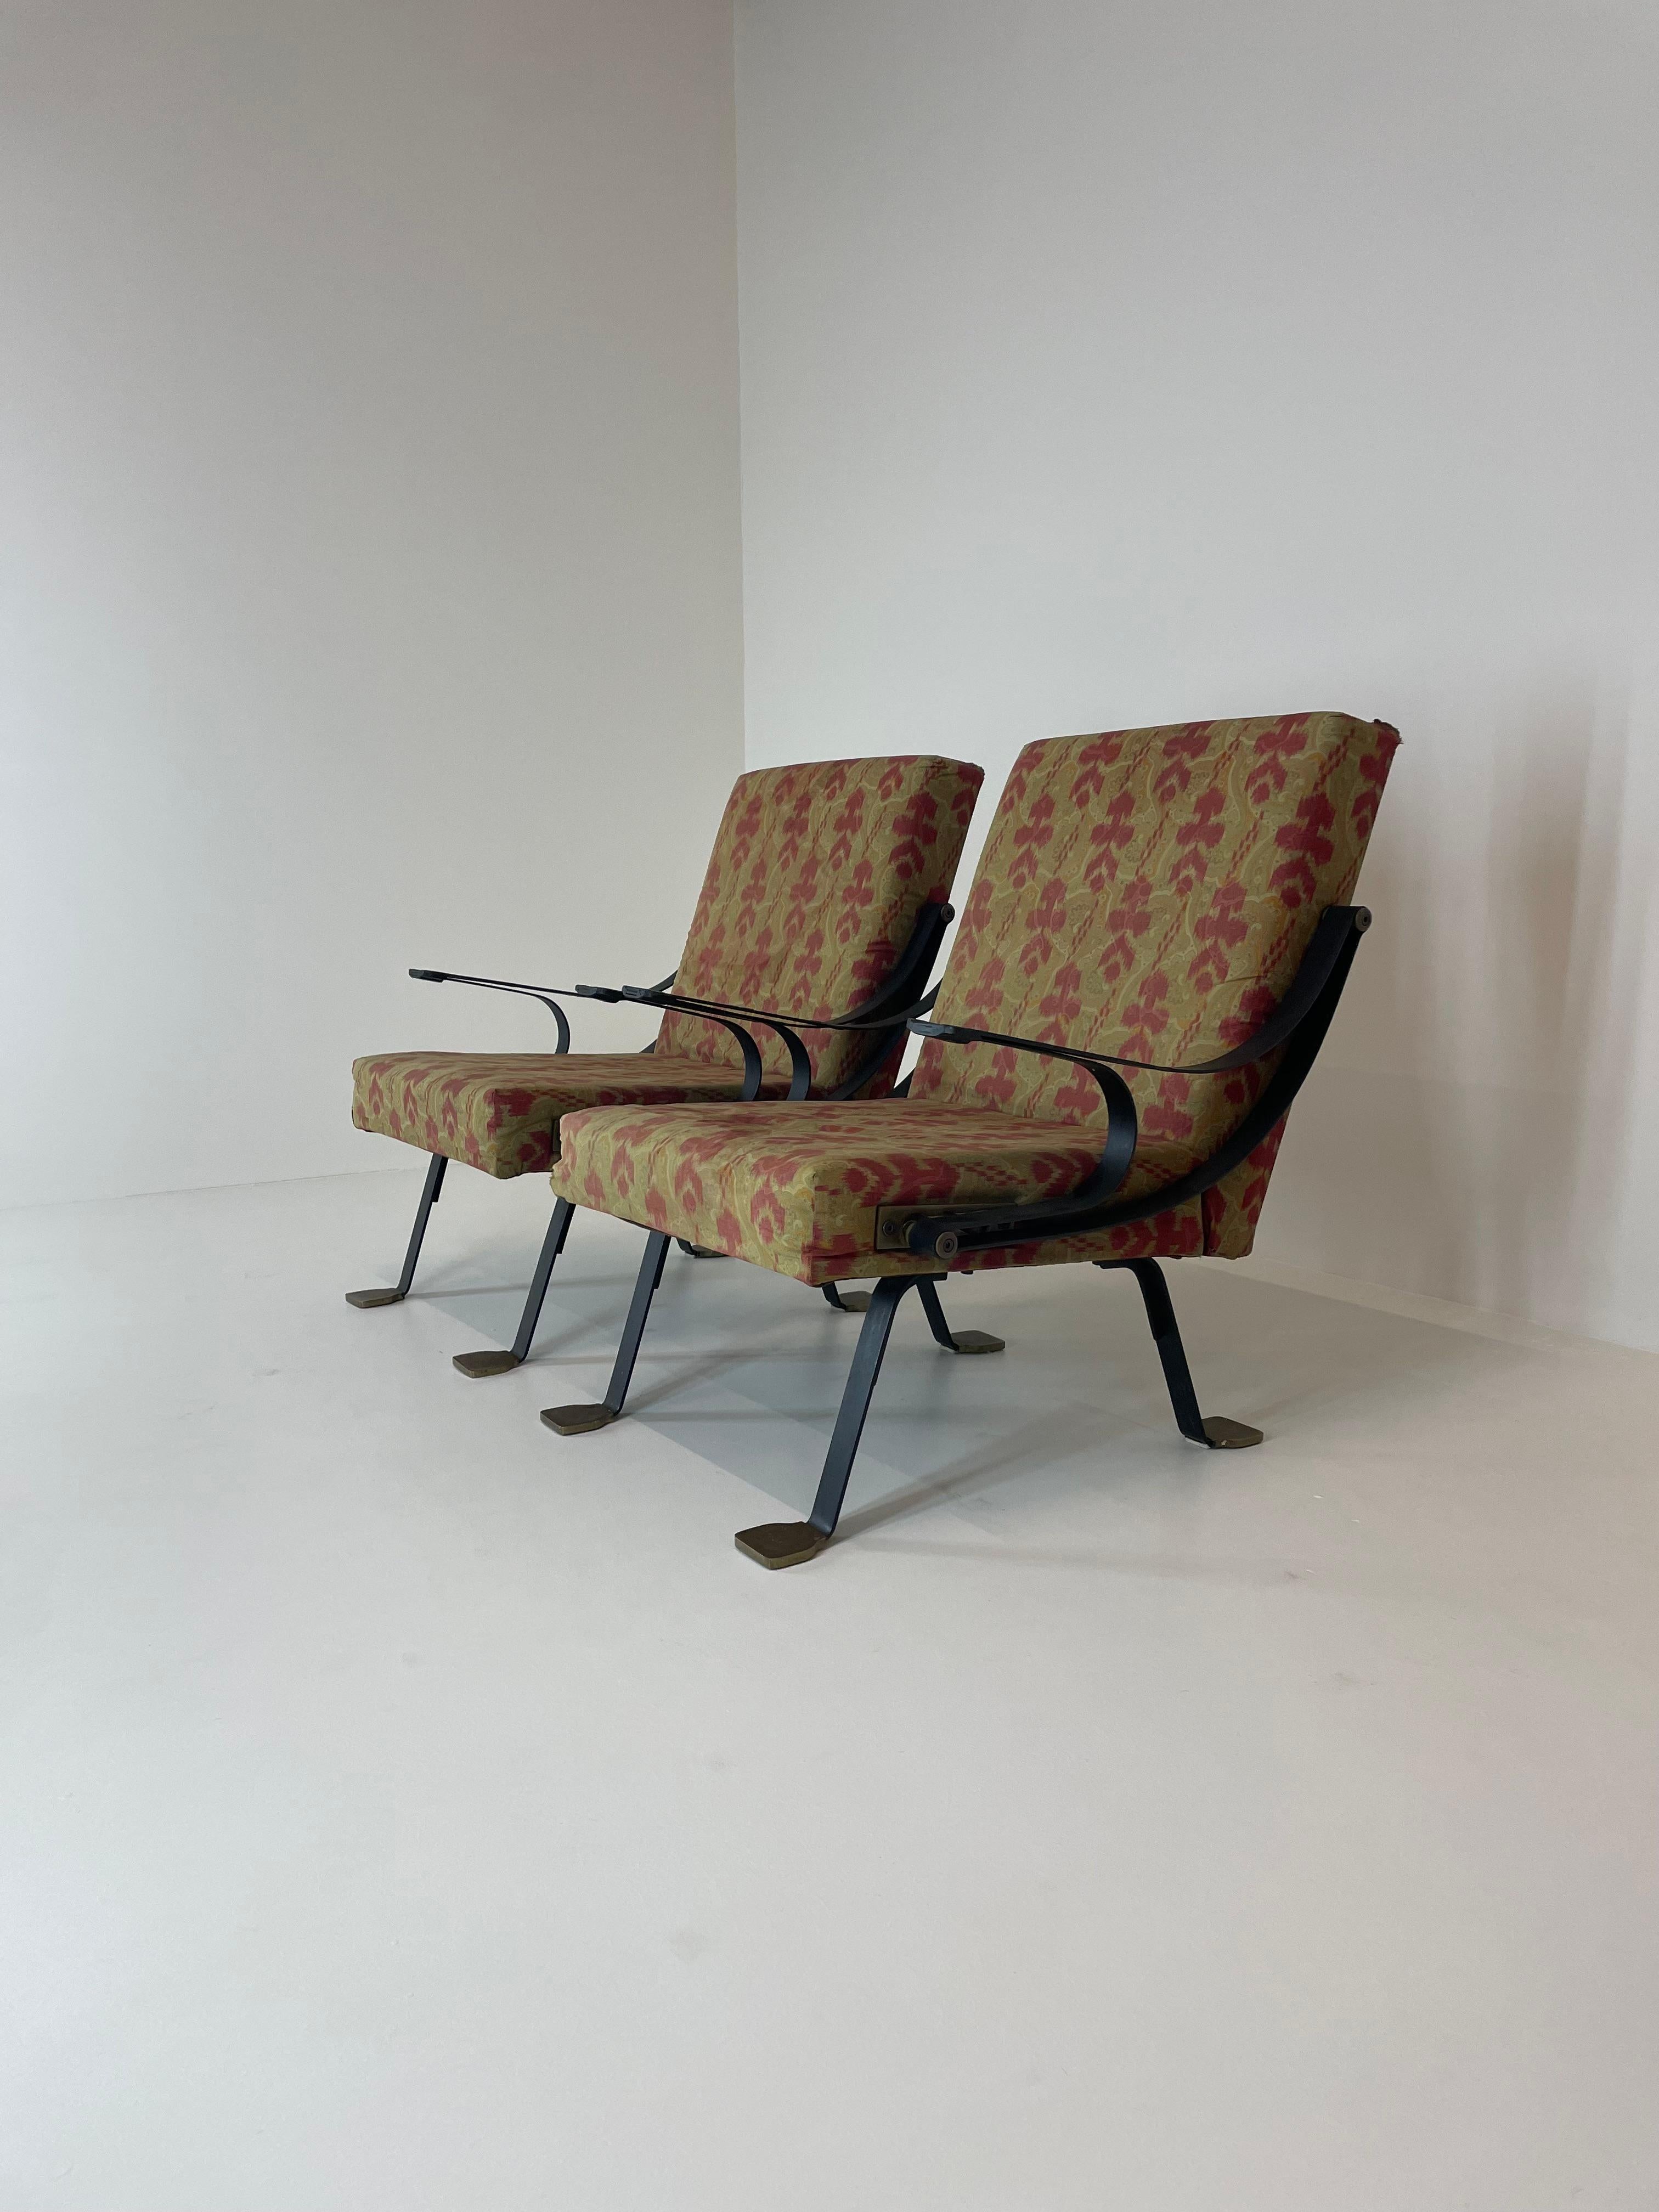 An extremely rare first edition pair of original 1950's Digamma reclining chairs designed by Ignazio Gardella designed in 1957 and manufactured by Gavina, Bologna, Italy. 
Original upholstery of the period that can be replaced at your